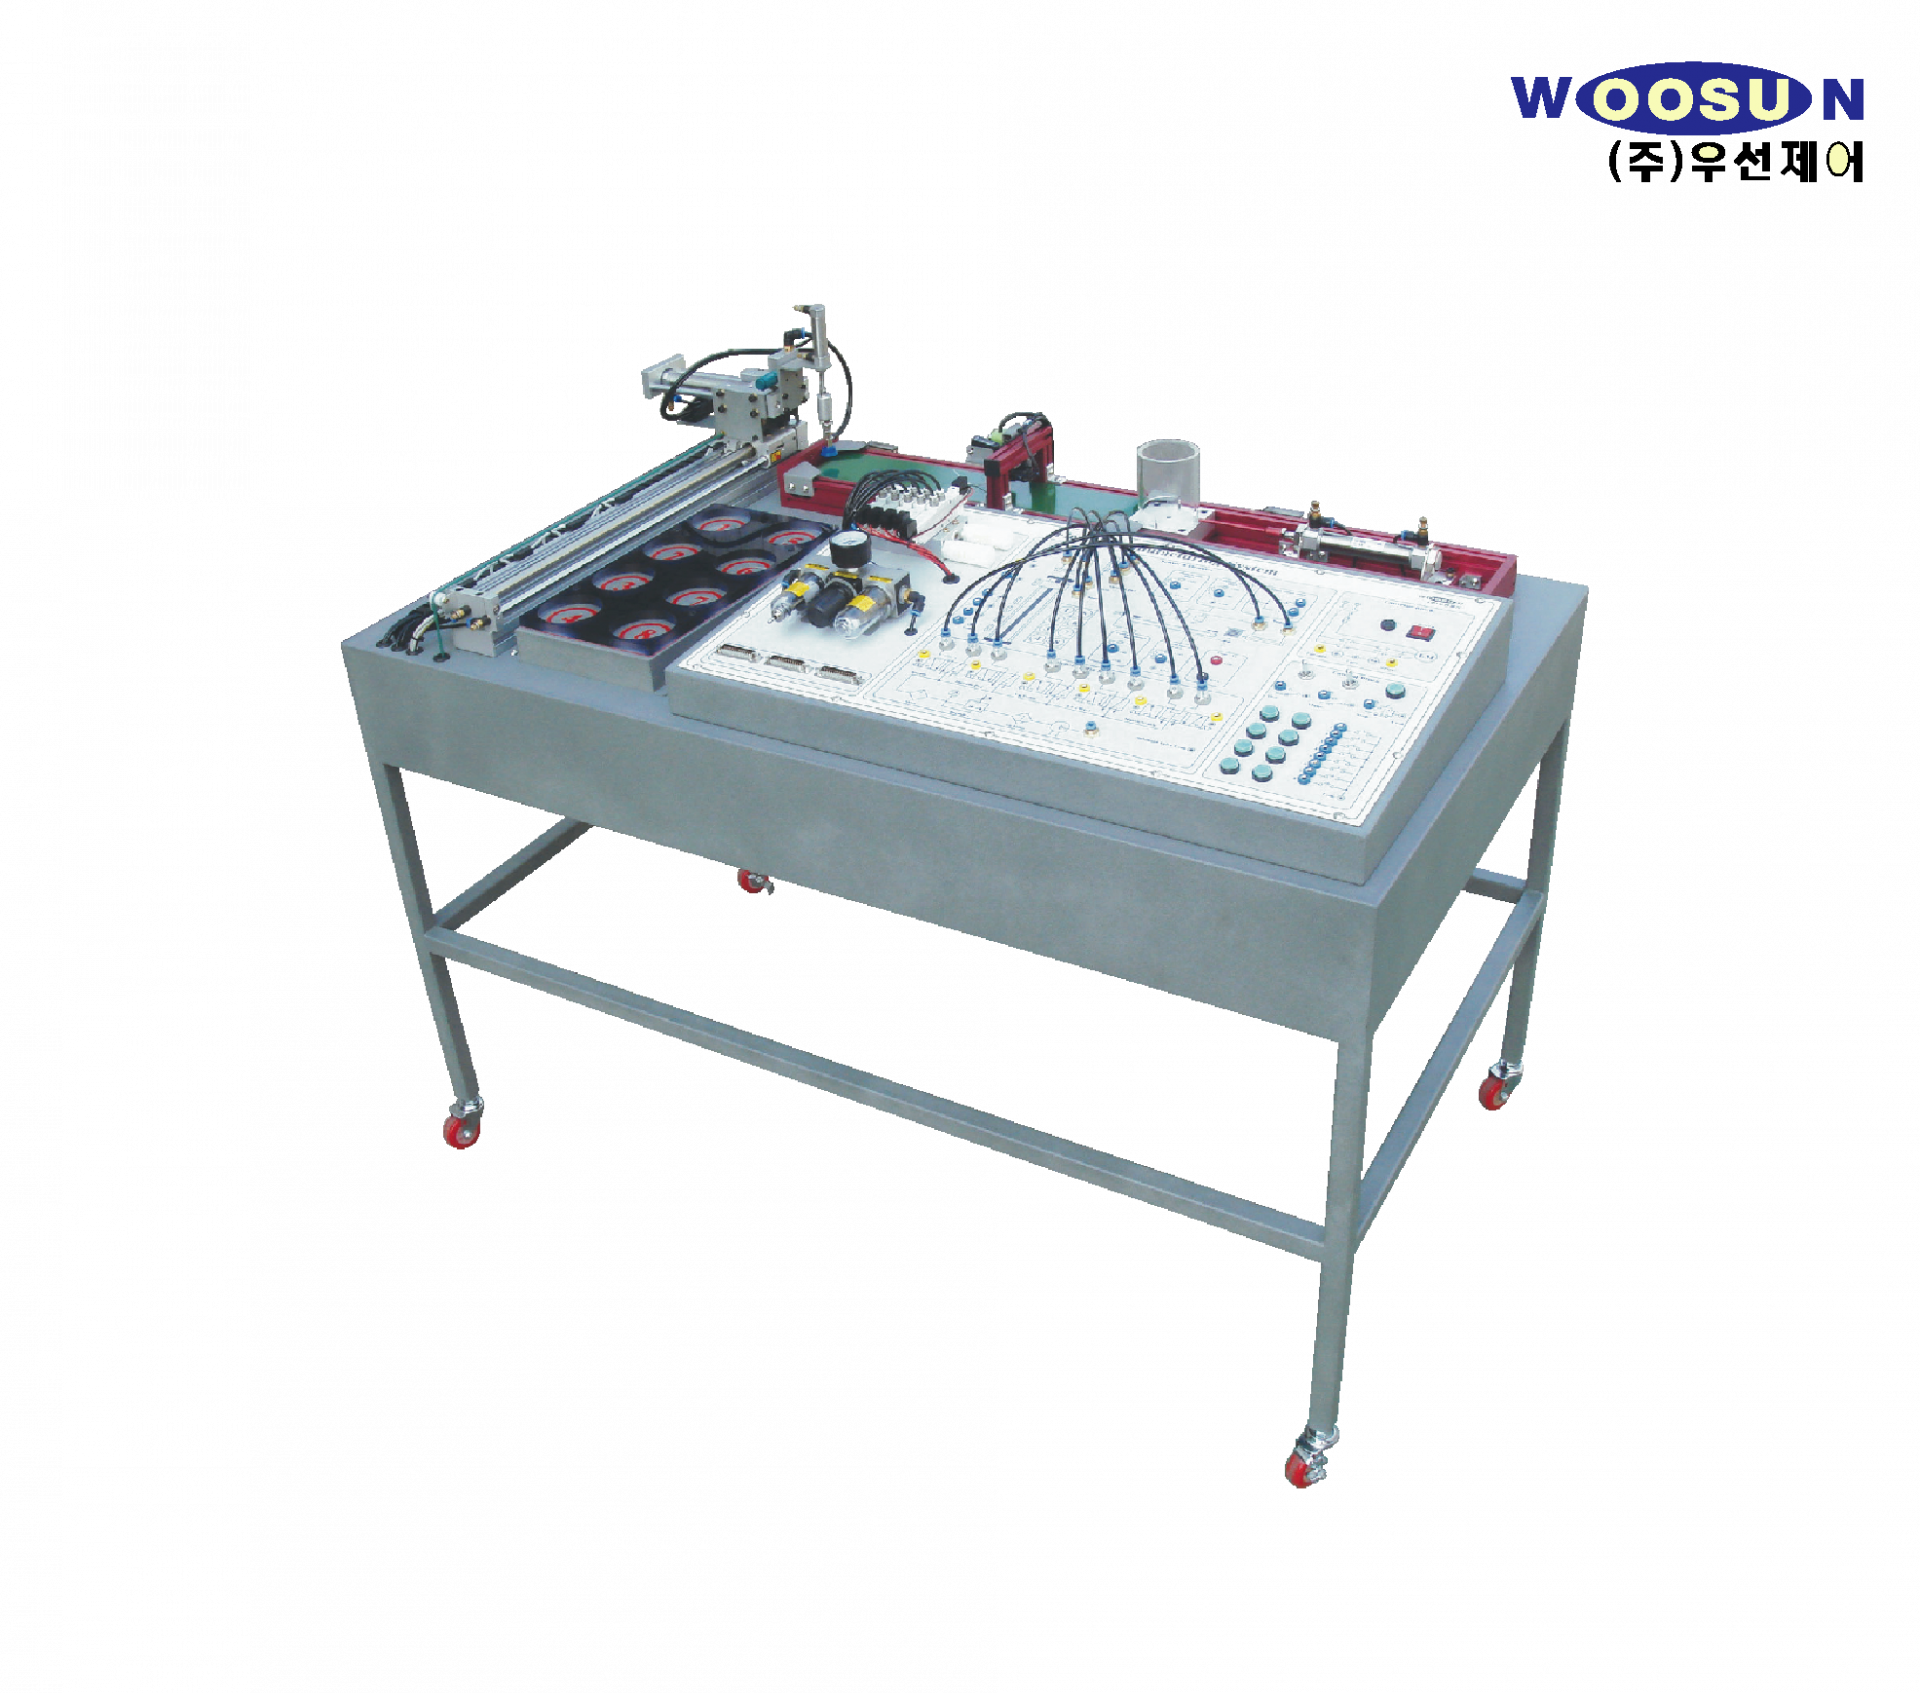 FLEXIBLE MANUFACTURING SYSTEM TRAINER 